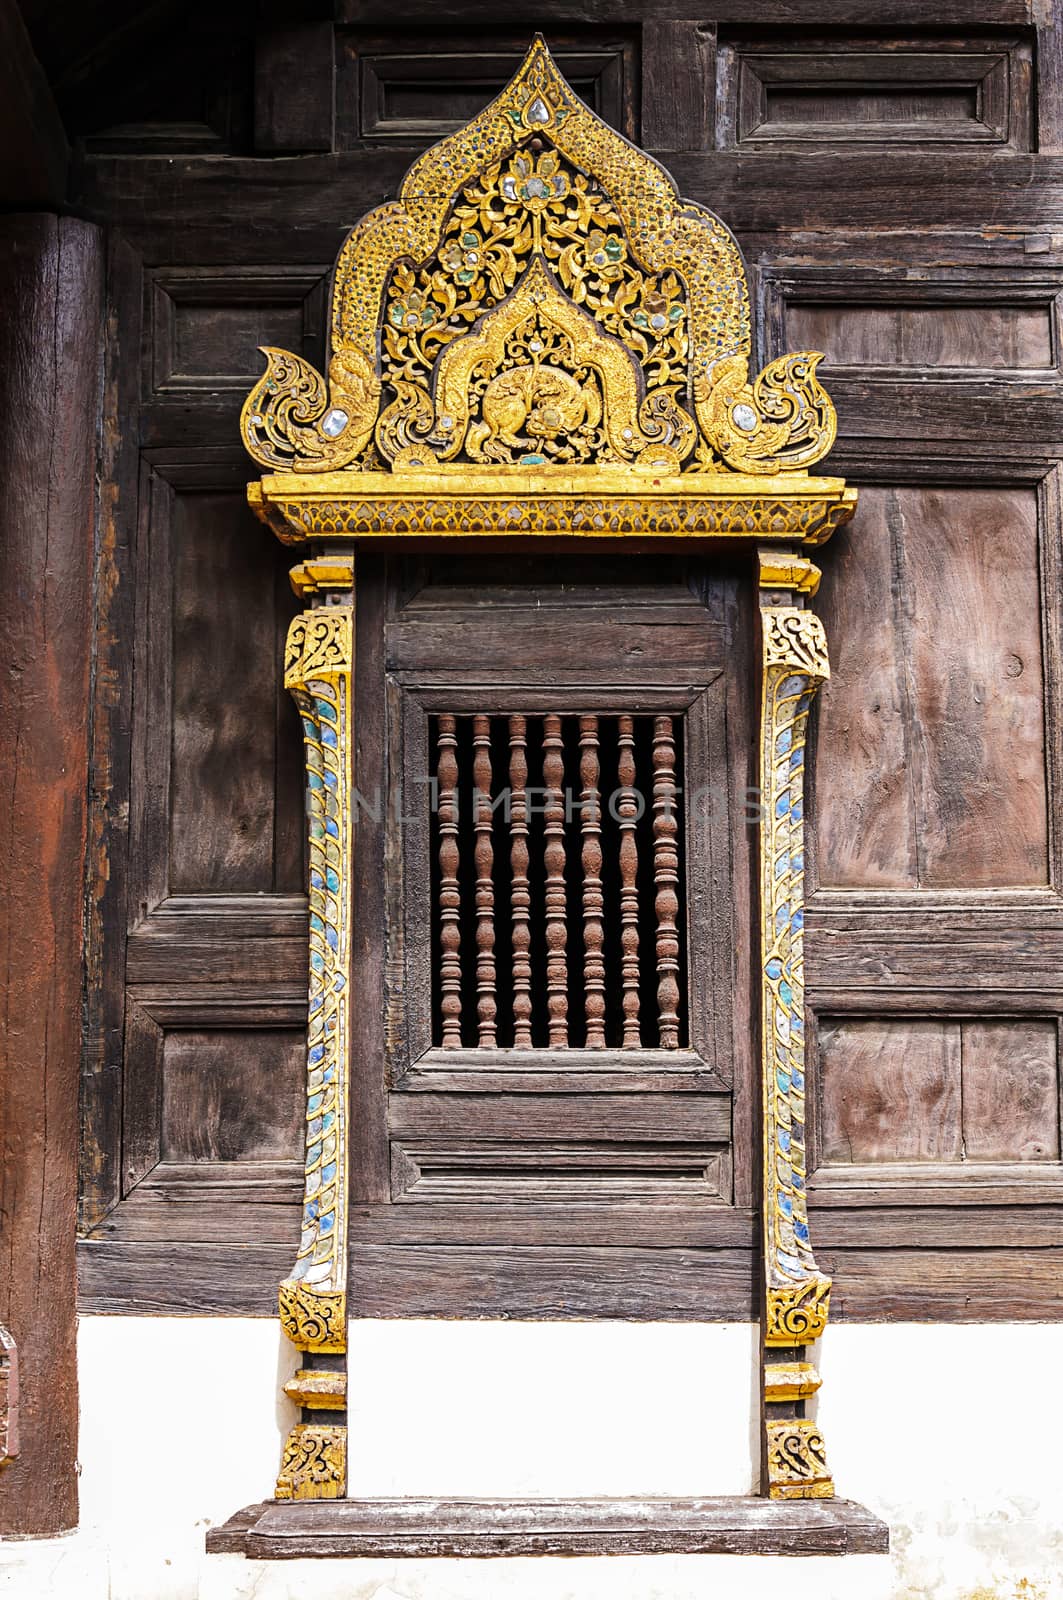 Wood carving decorated at Wat Phan-Tao temple in Chiang mai,Thailand